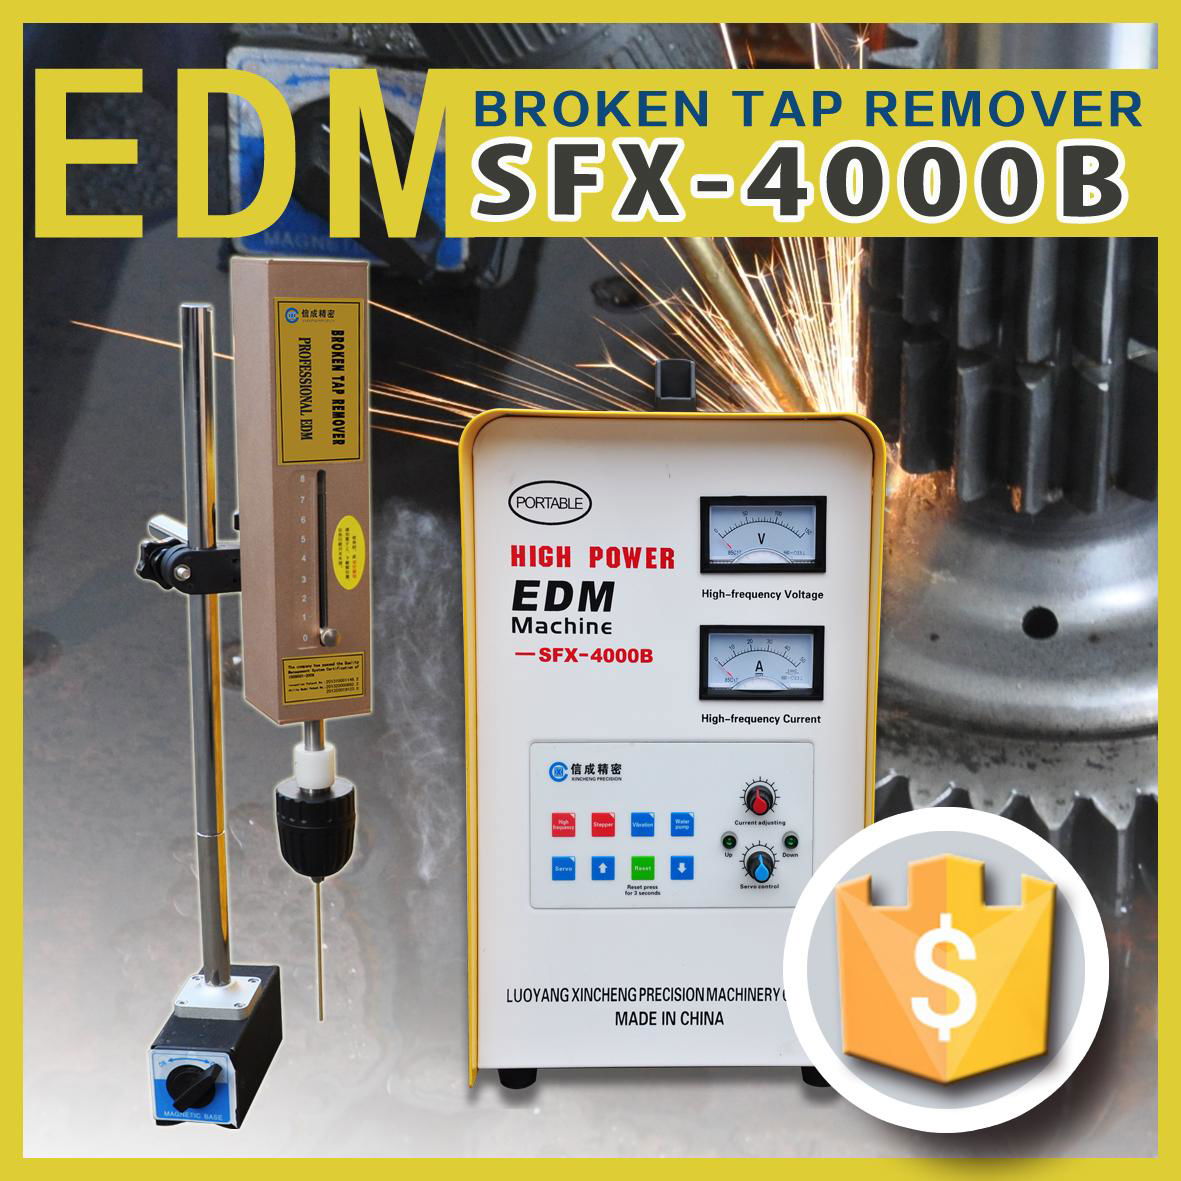 Broken tap remover portable electric discharge Ultra high power SFX-4000B